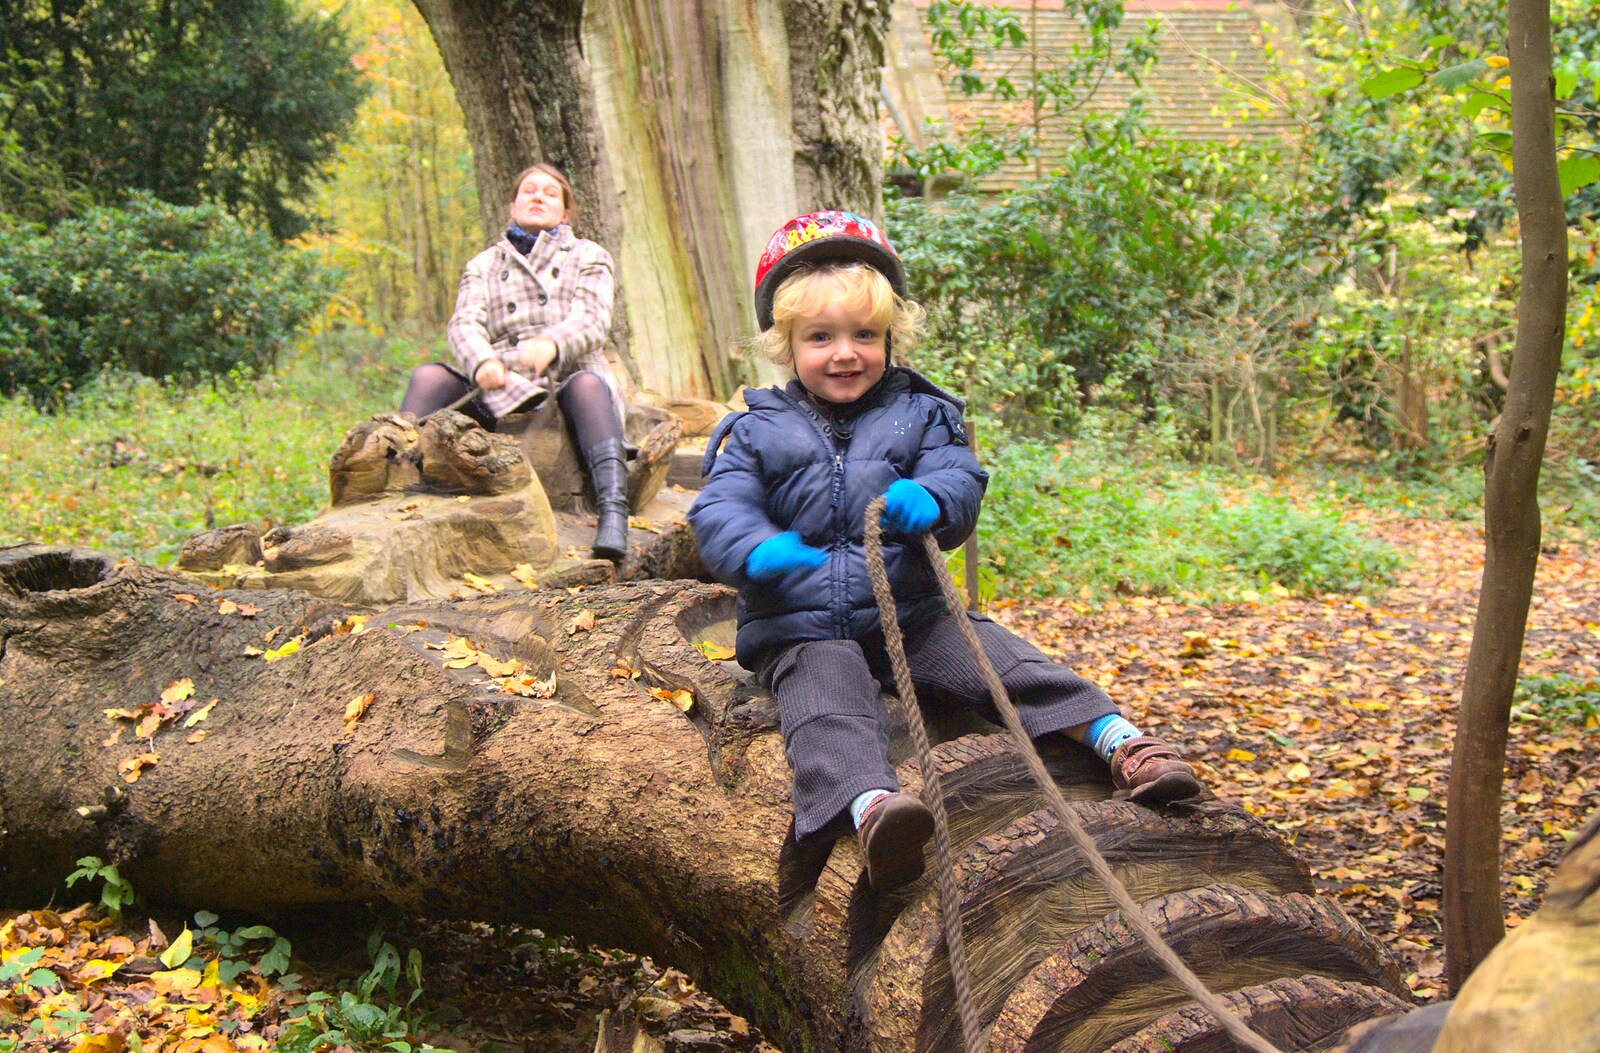 Isobel and Fred ride the wooden dragon from Autumn in Thornham Estate, Thornham, Suffolk - 6th November 2011